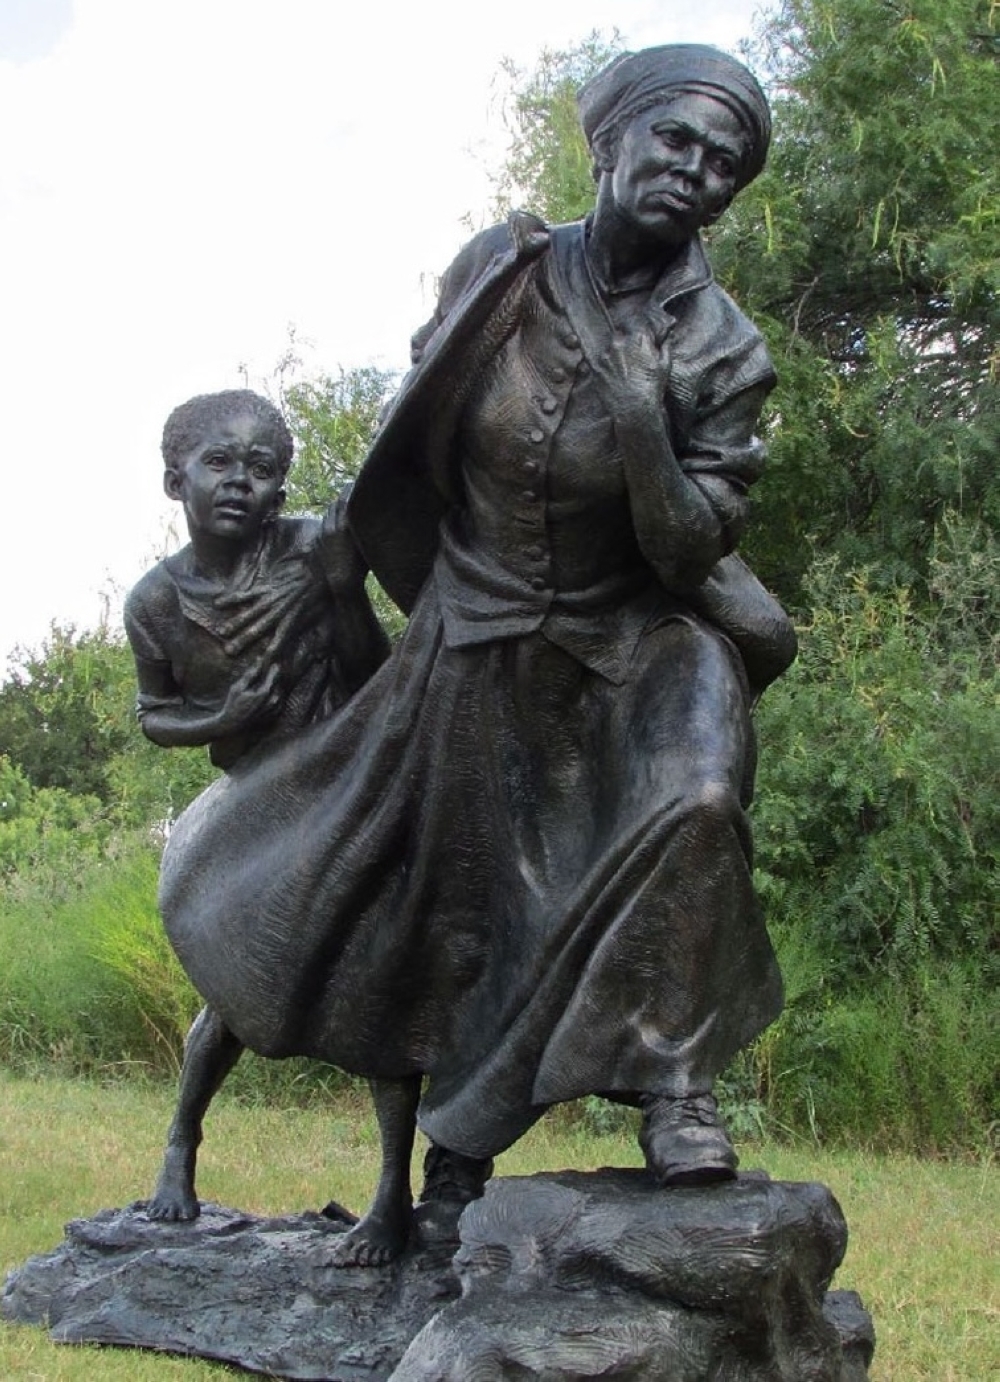 Wesley Wofford’s traveling exhibit, “Harriet Tubman: Journey to Freedom,” will make its Texas debut during Bastrop’s Juneteenth celebration. (Courtesy Wesley Wofford Sculpture Studio)